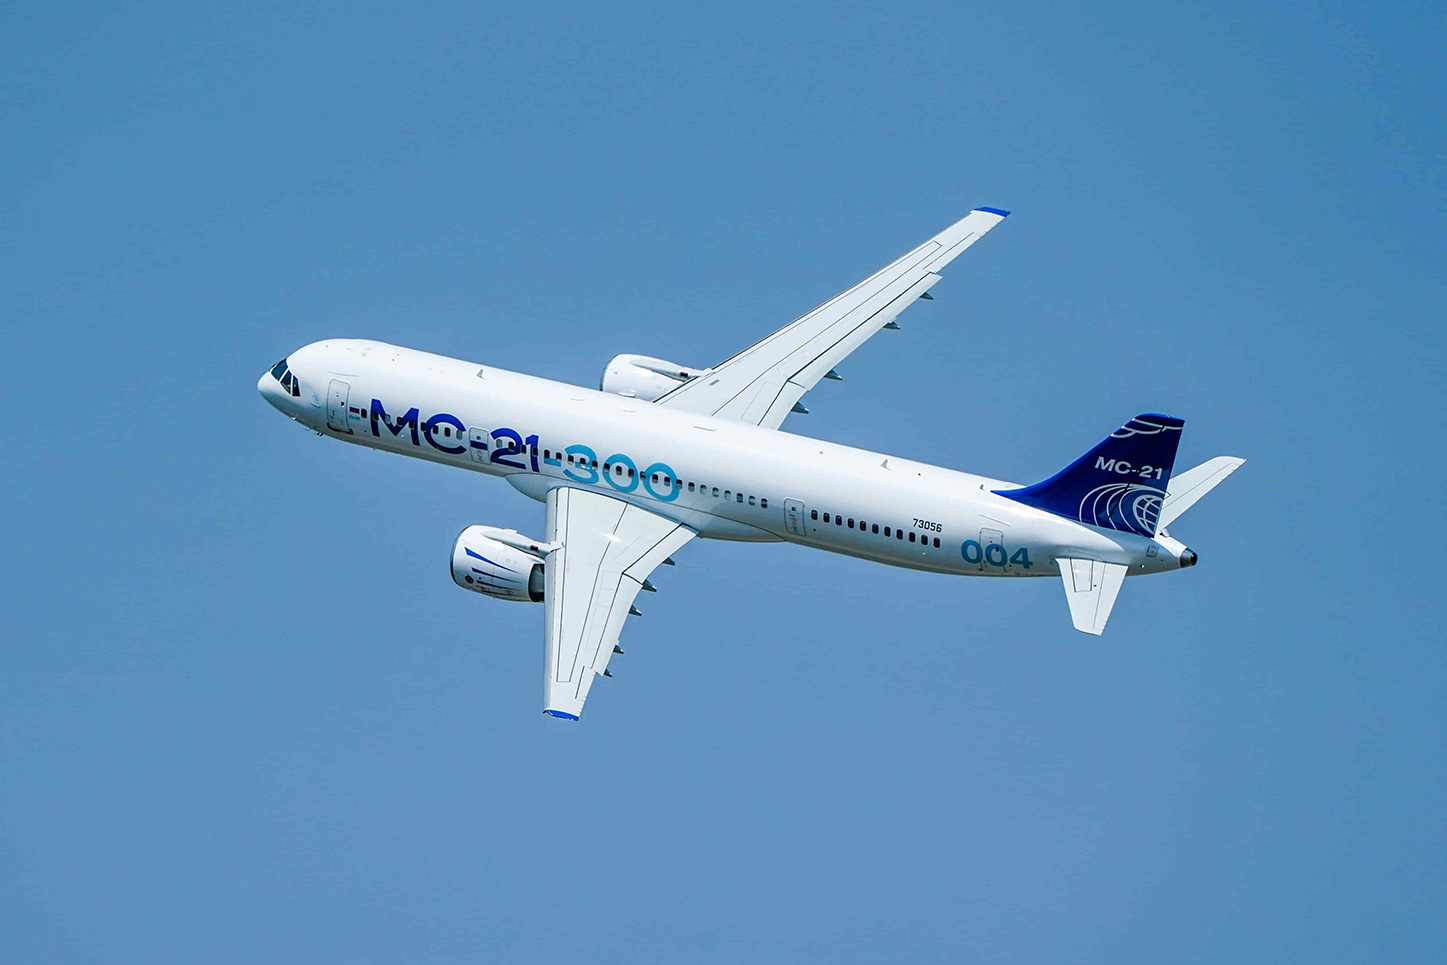 MC-21-300 prototype will continue testing after painting